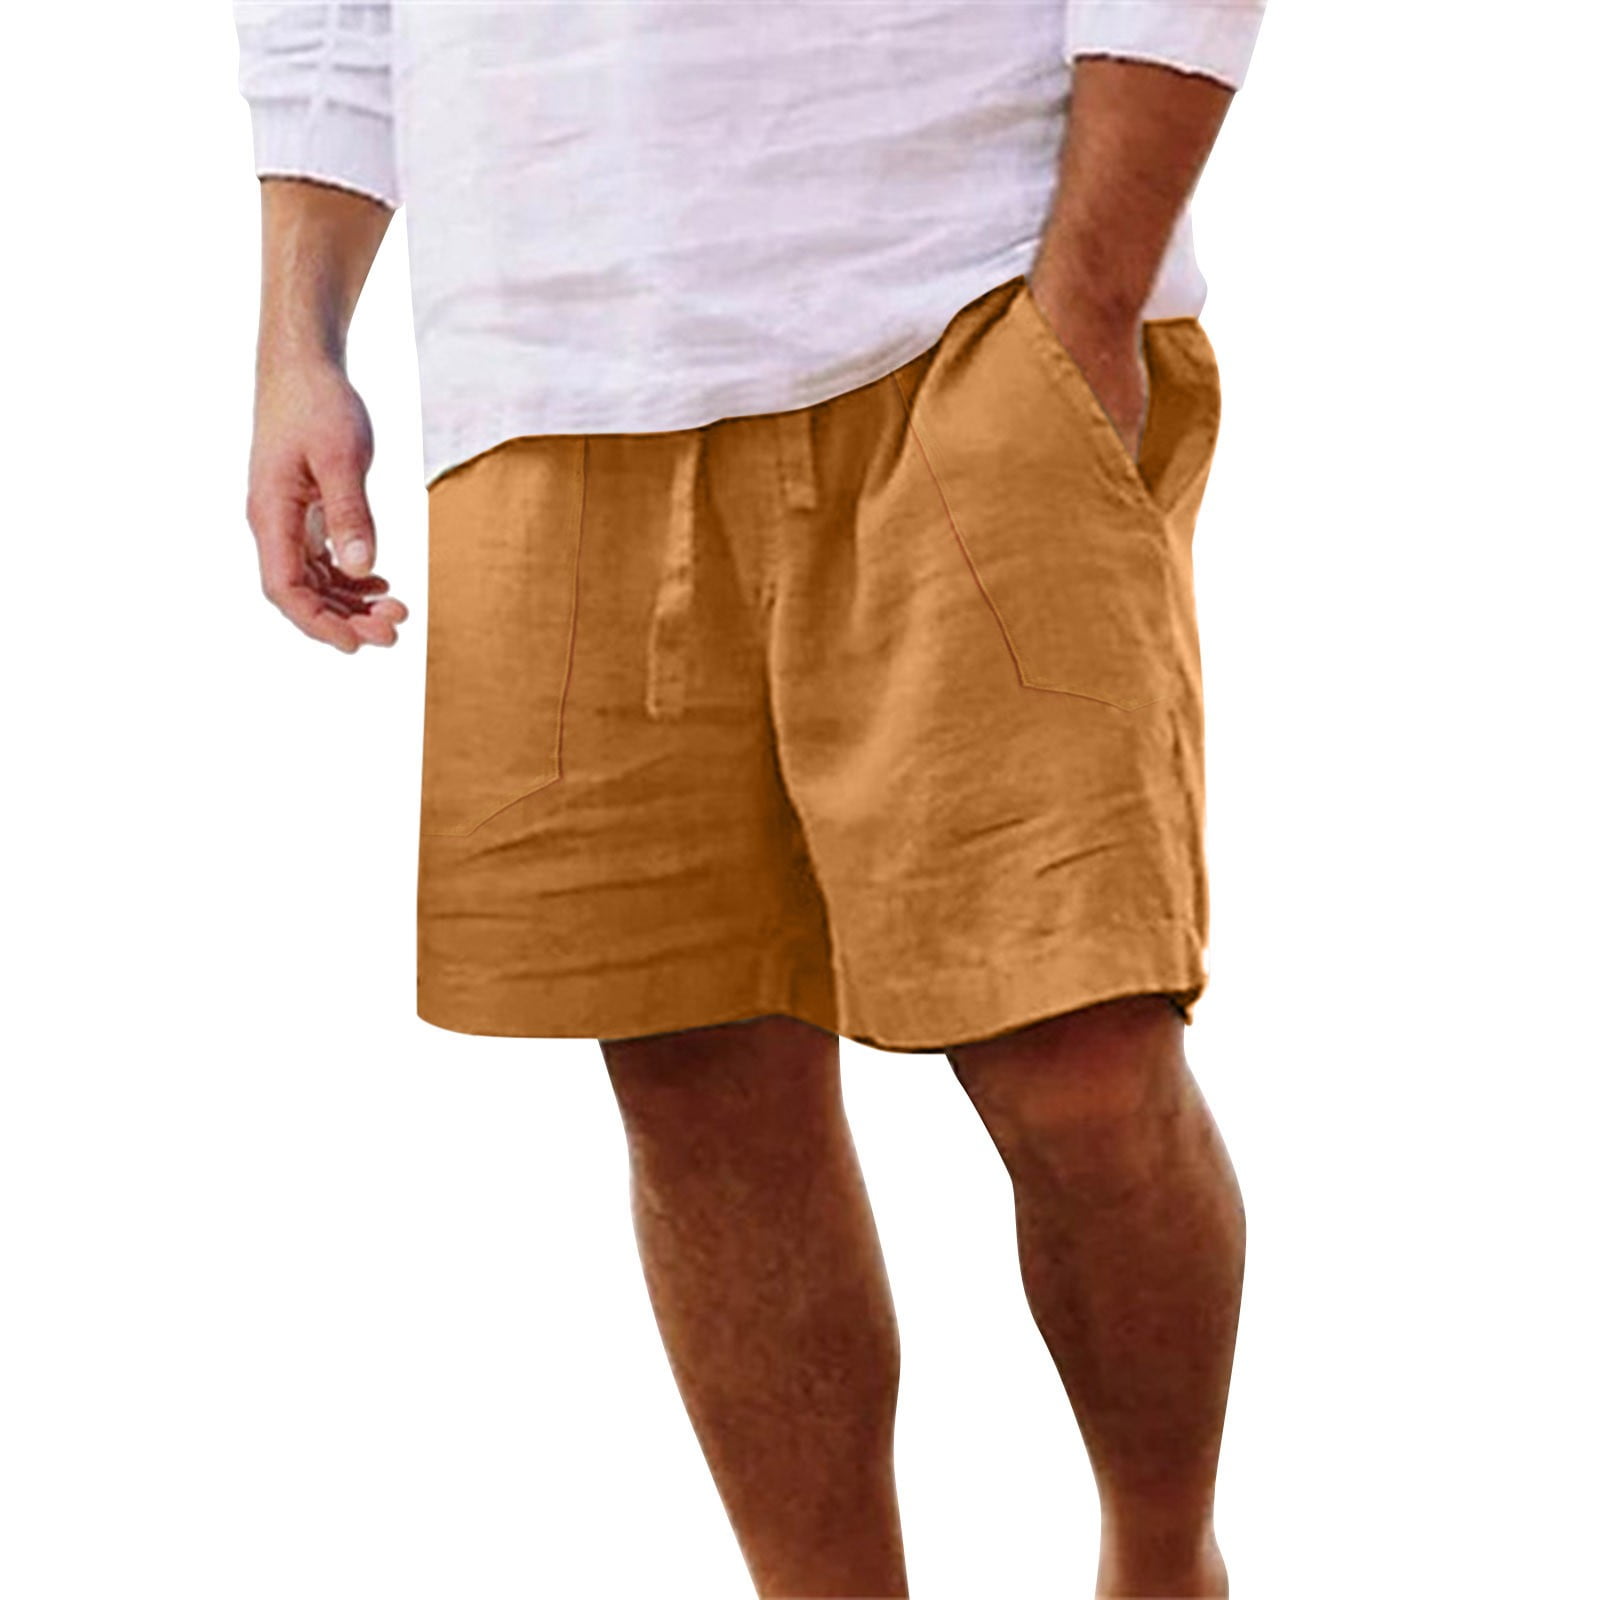 Ierhent Shorts for Men Casual Men Shorts Casual Cargo Shorts Pants With ...